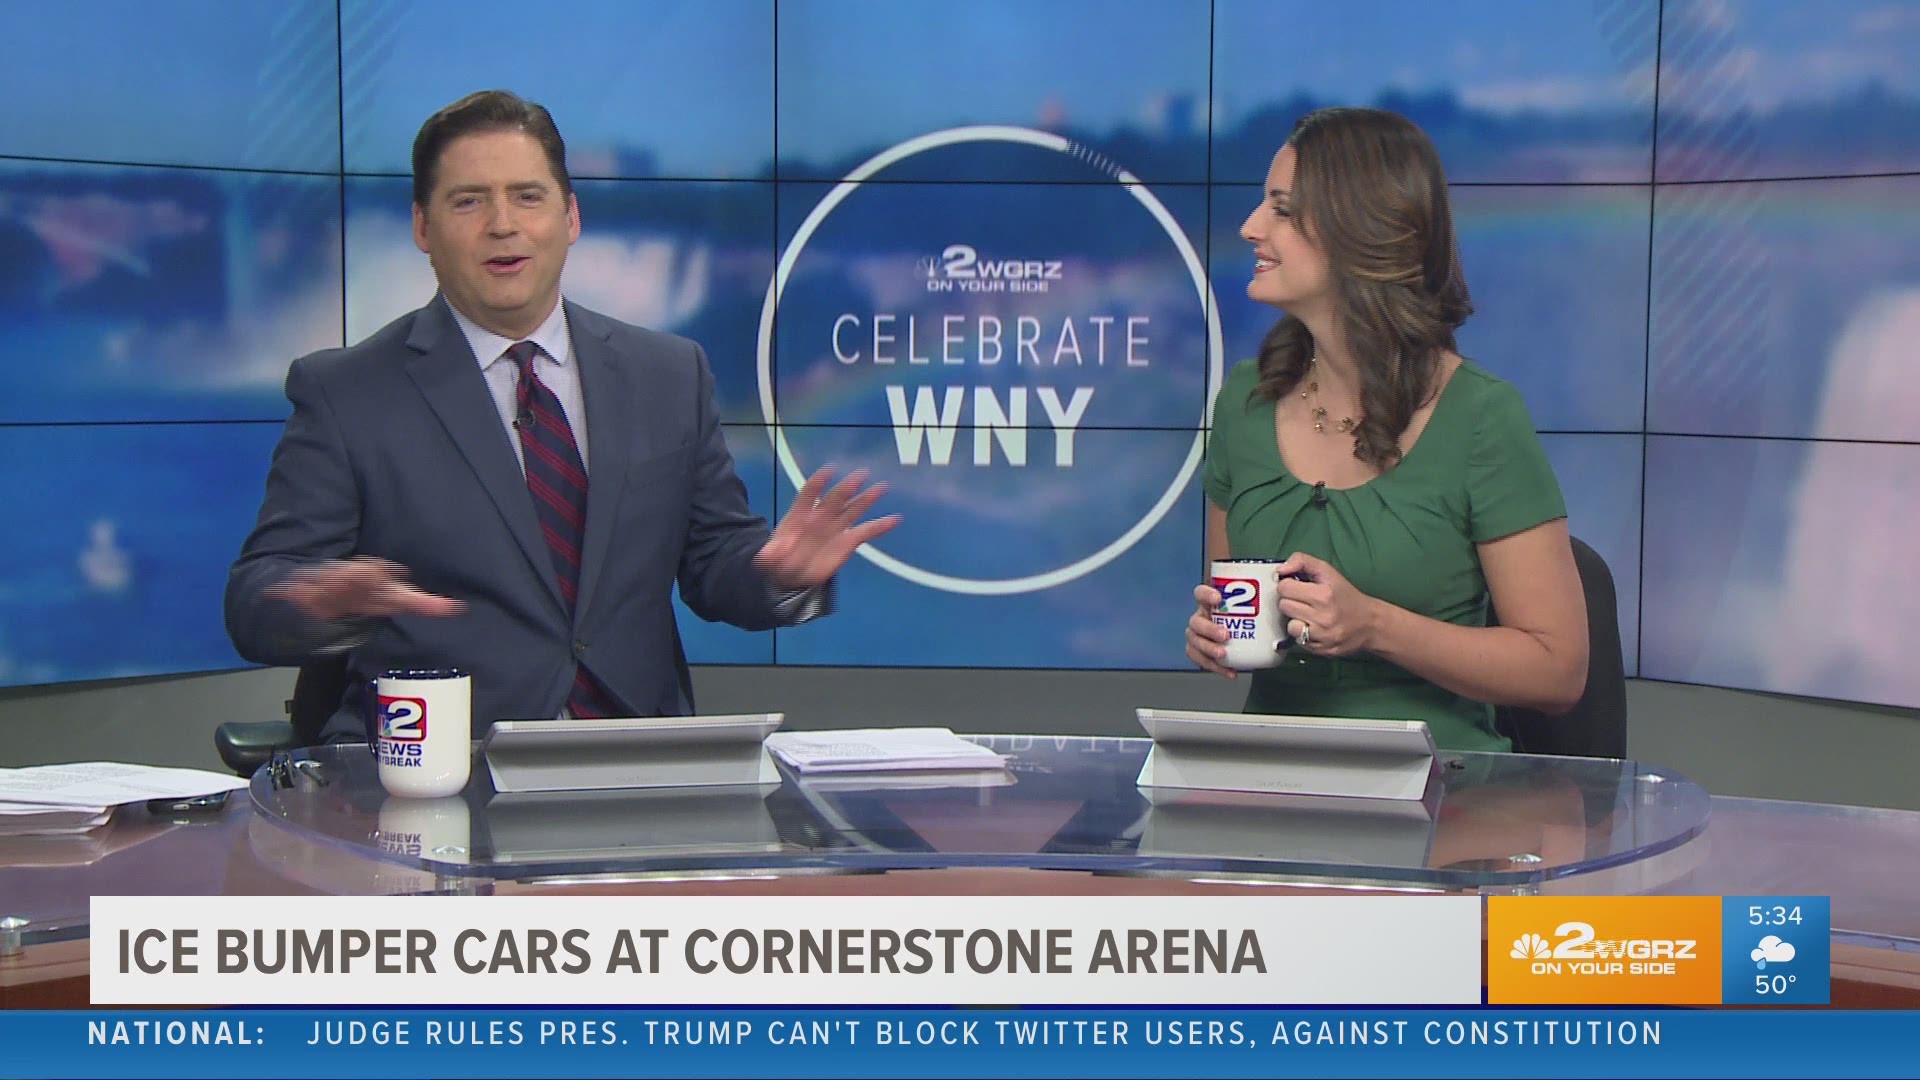 Daybreak previews Western New York's newest summer ice activity: ice bumper cars